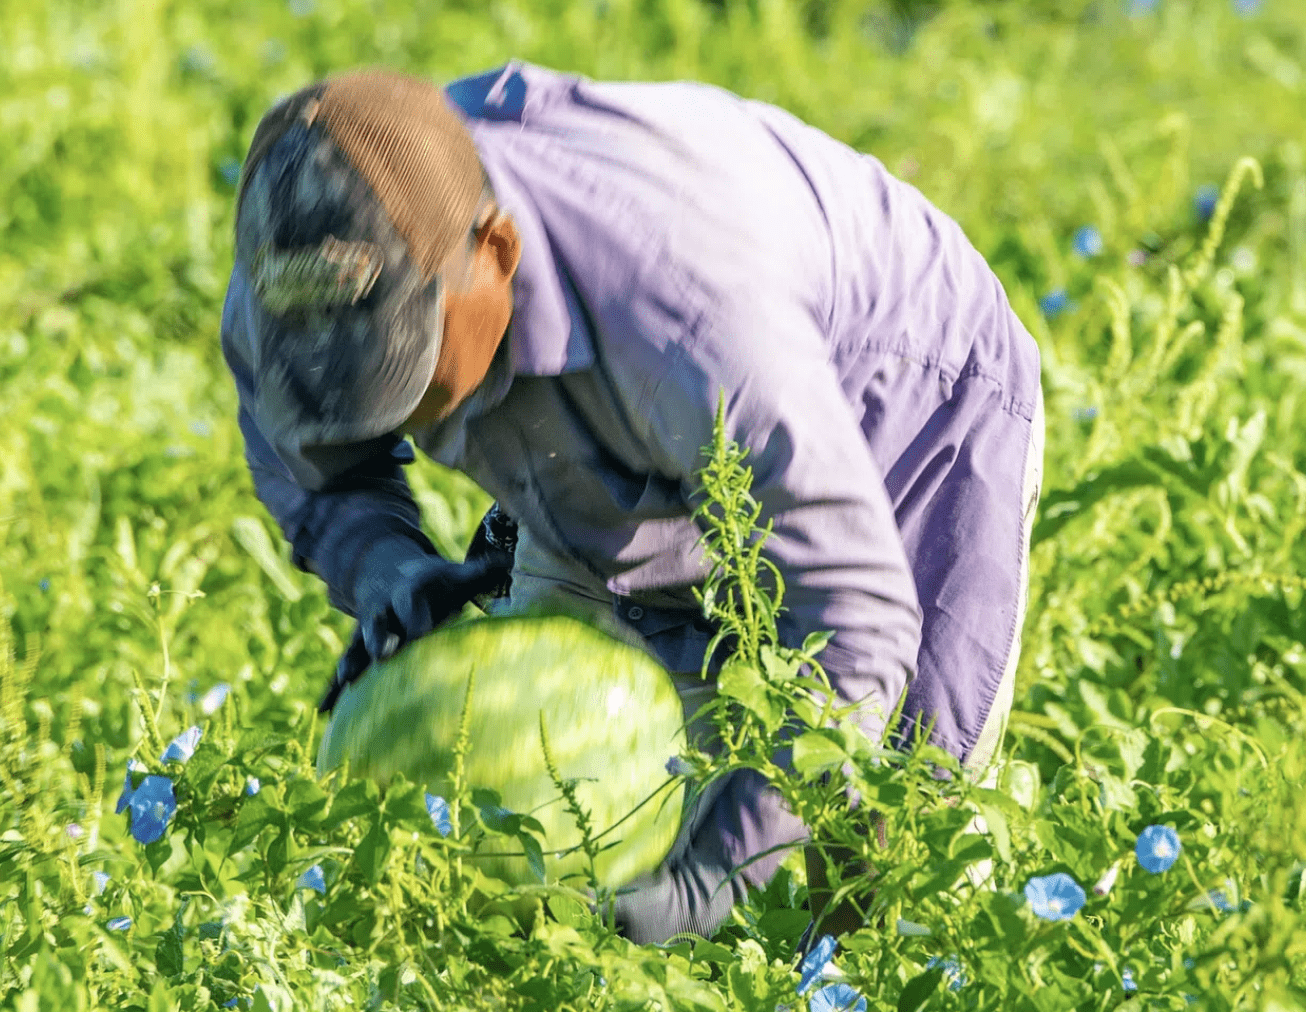 FILE PHOTO: A Workers harvests watermelons